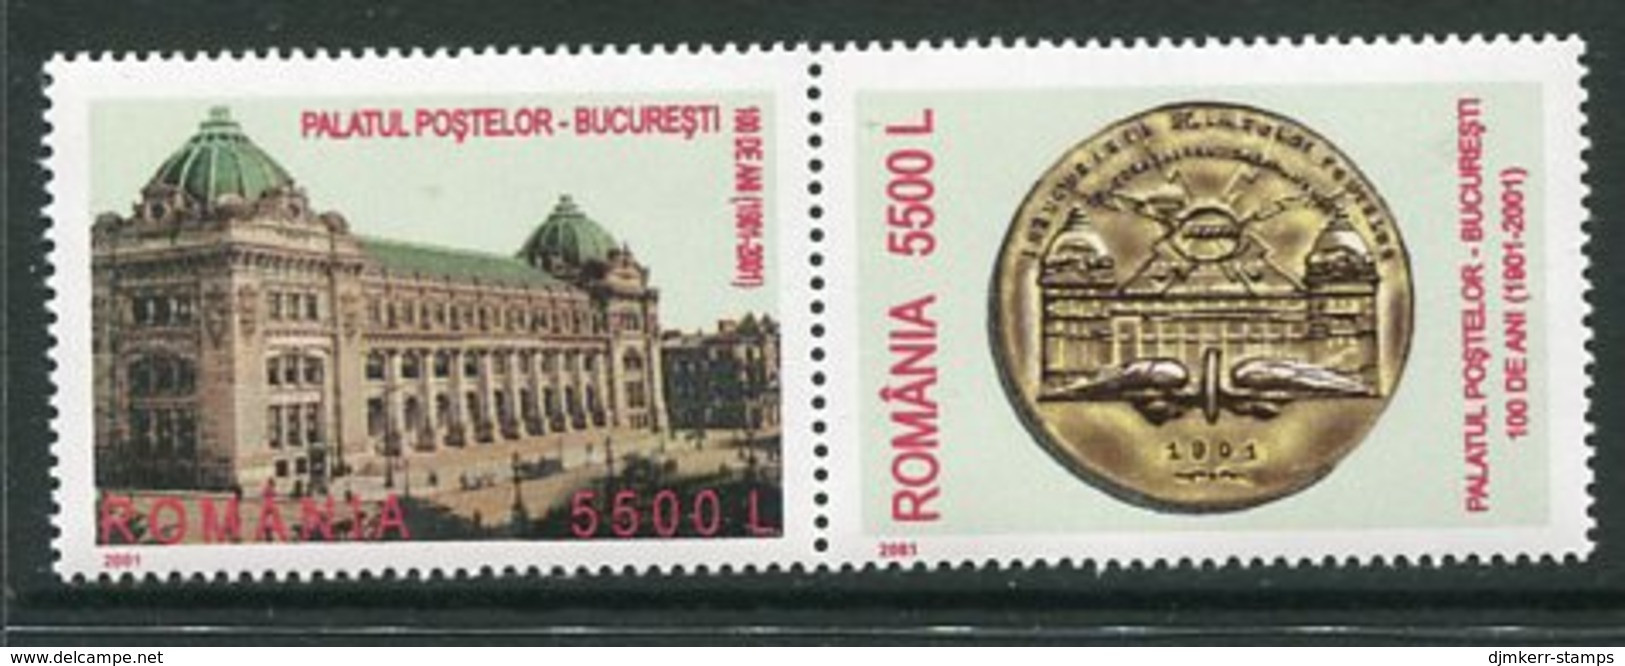 ROMANIA 2001 Centenary Of Main Post Office In Bucarest  MNH / **.  Michel 5626-27 - Unused Stamps